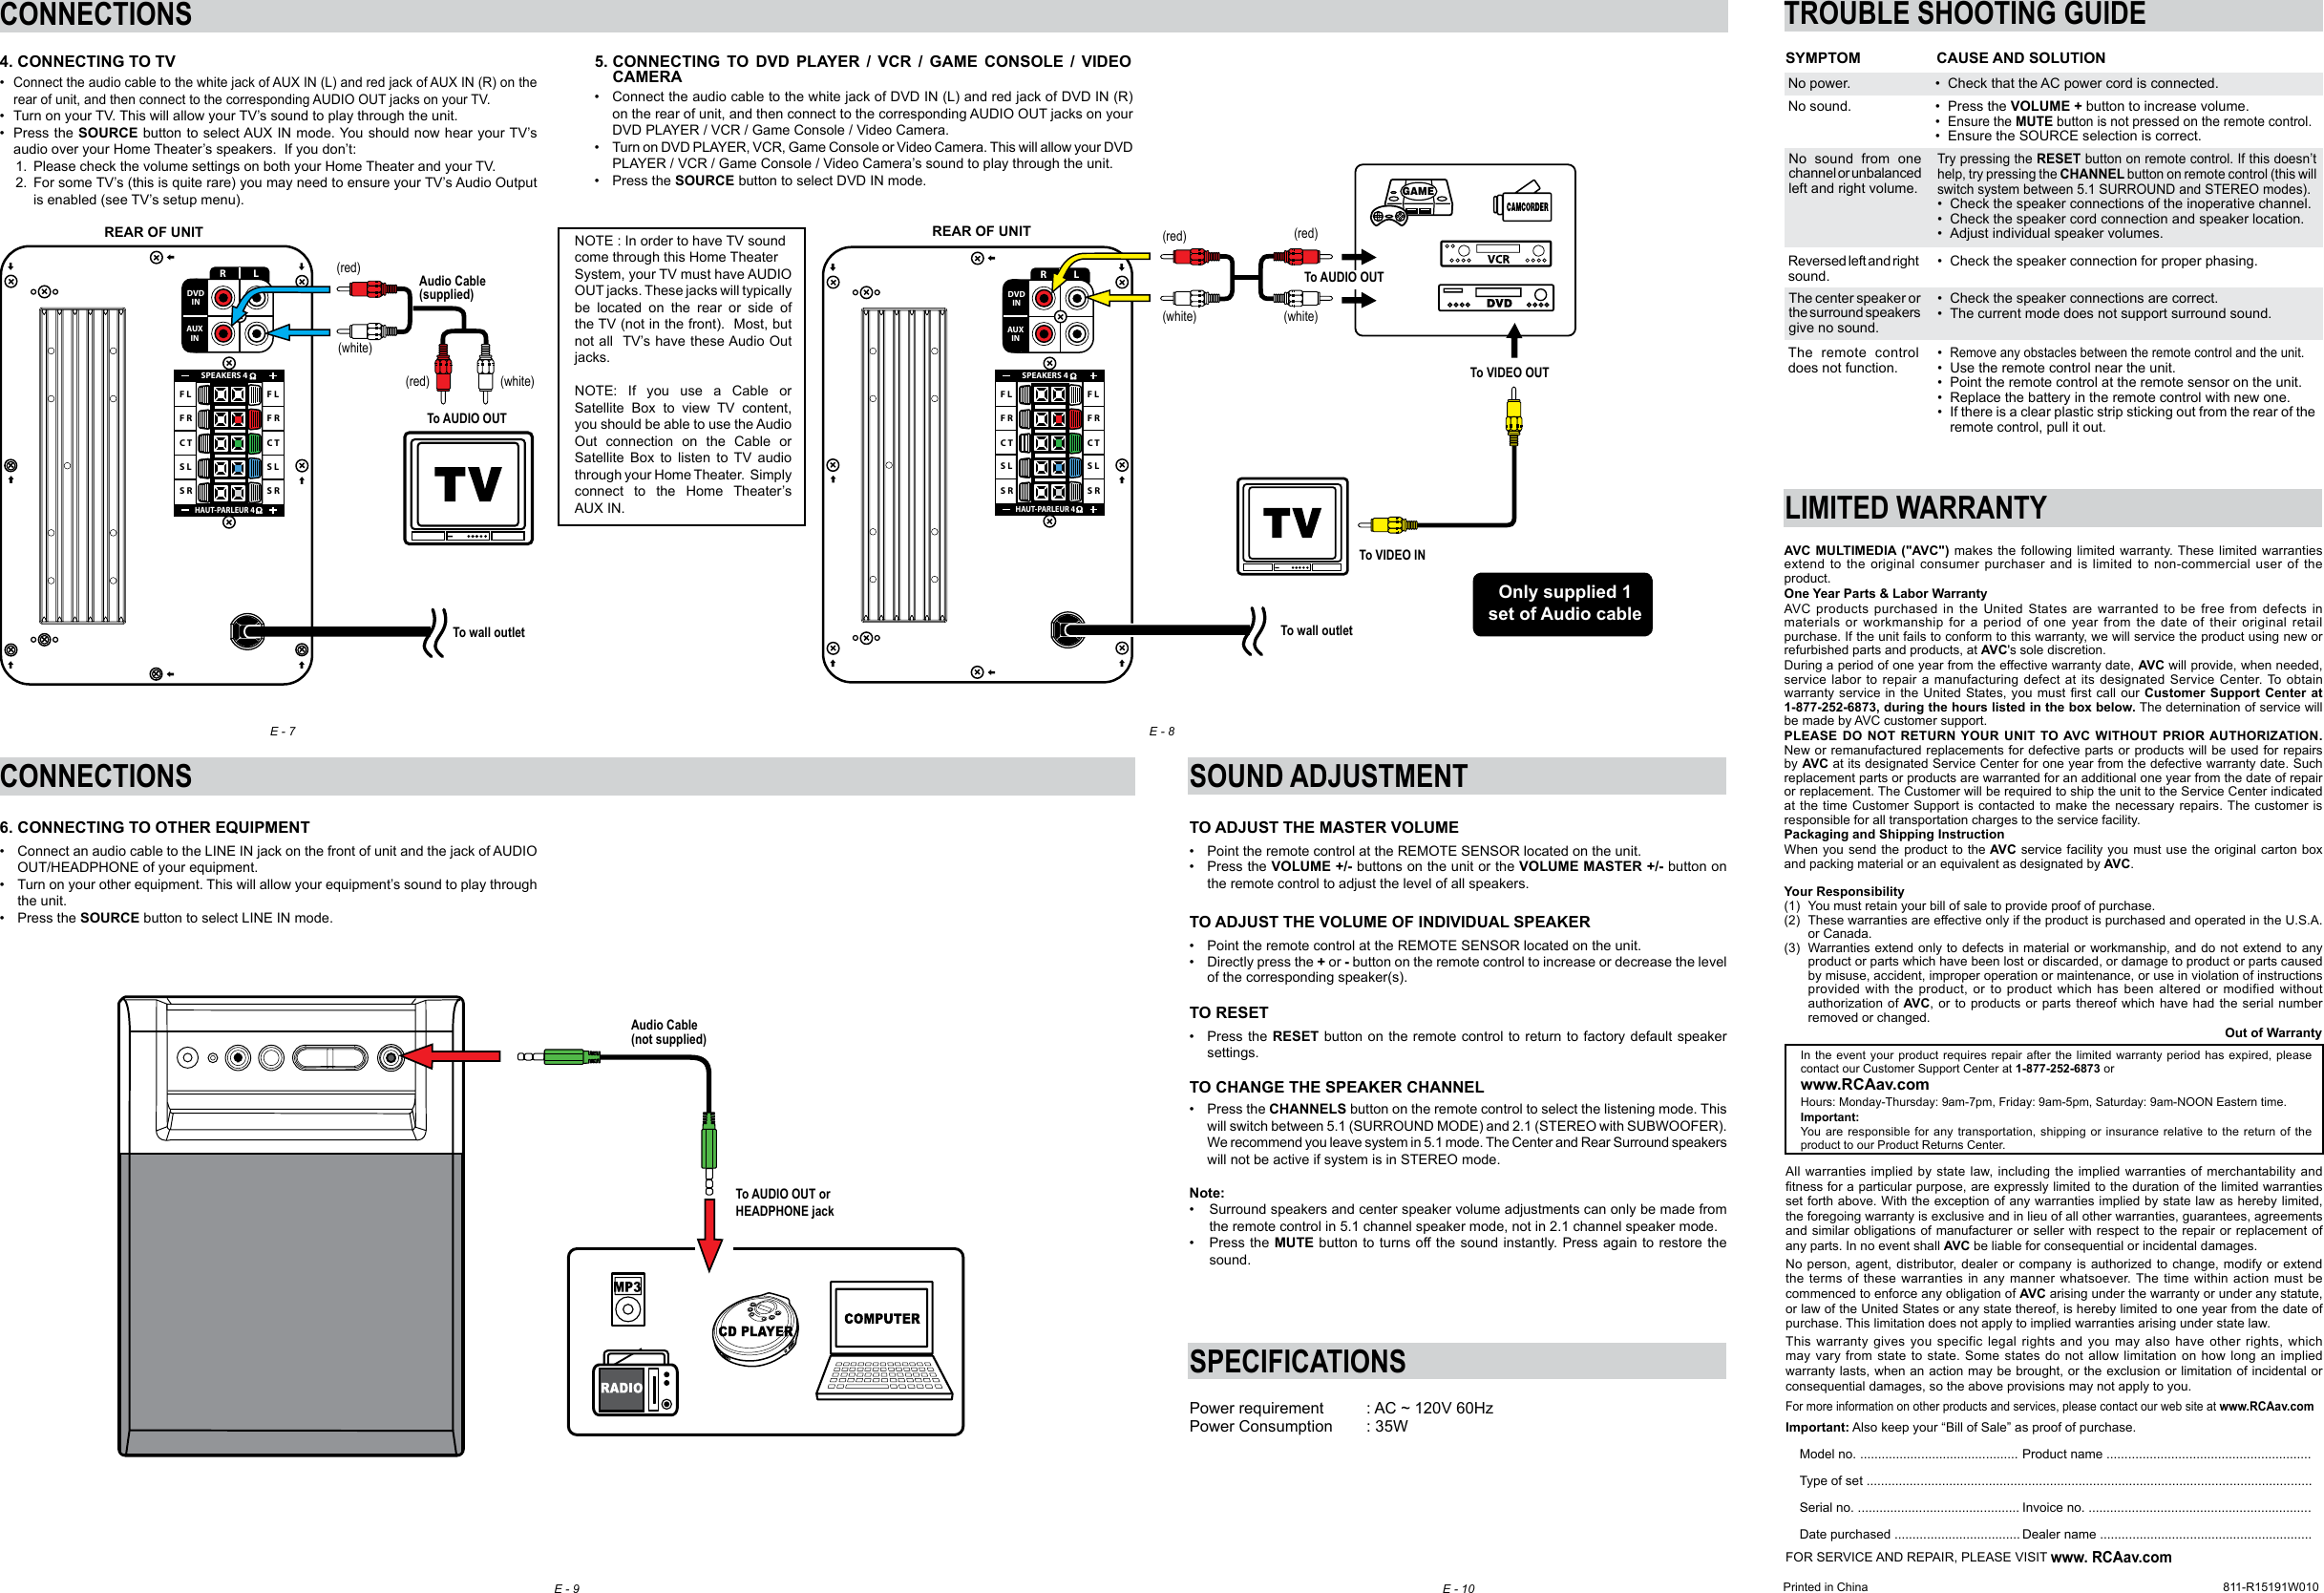 Rca Home Theater Manual | Home Theater